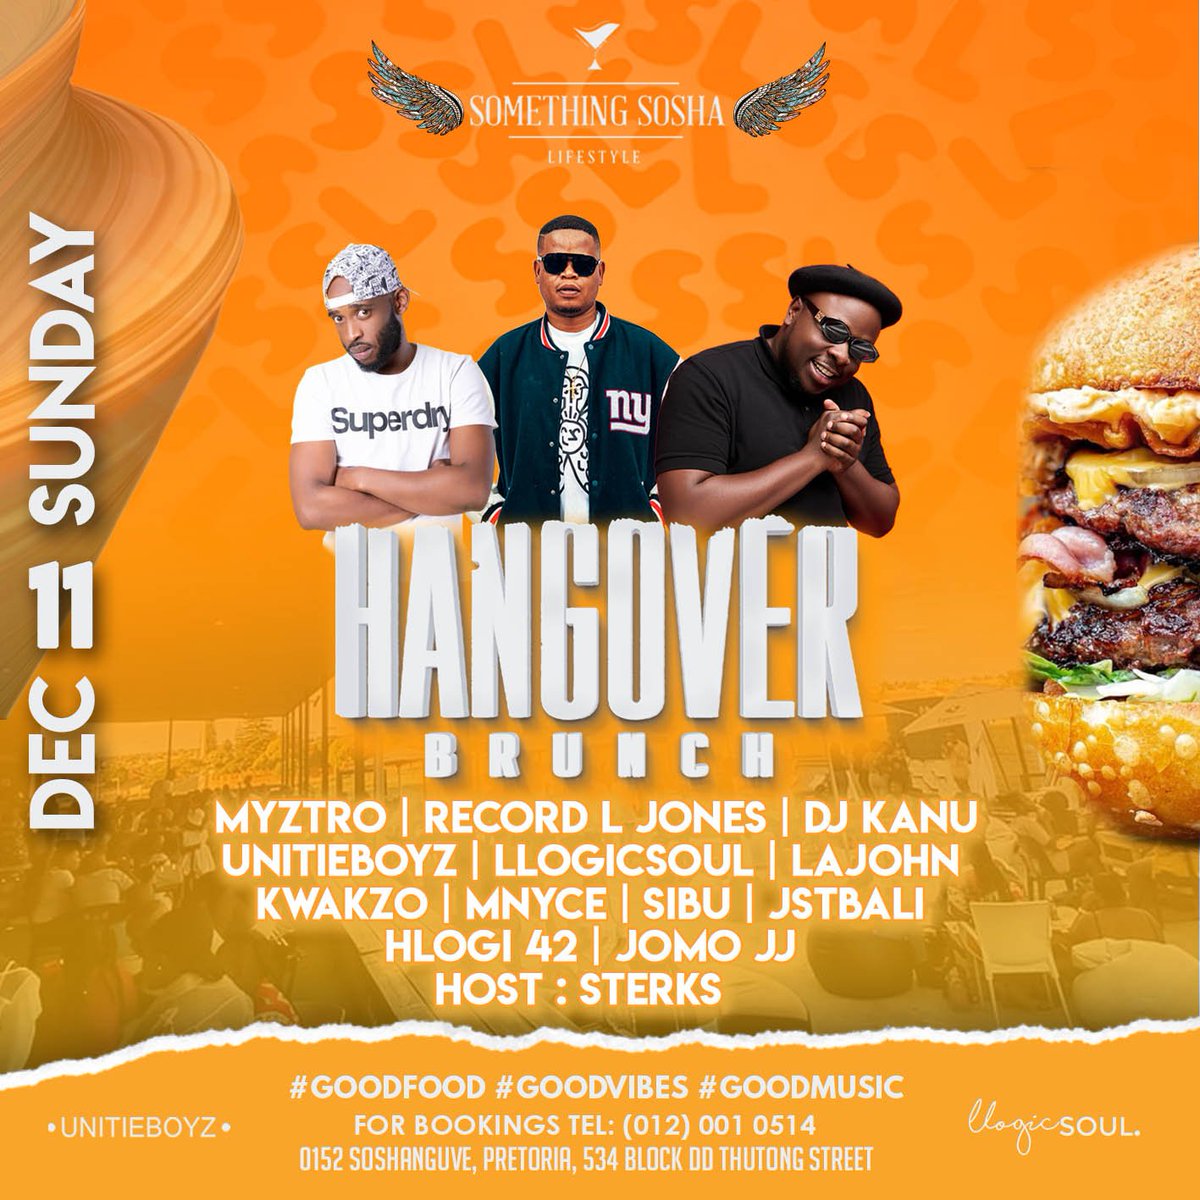 Let's Cure those Hangovers this Sunday at @SomethingSosha over some Good Food, Refreshing Drinks and Good Music 🎶 🎵  Issa @Hangoverbrunch1 baby 💃💃🔥

#SteksTheHost
#HostWithTheMost 
#HangoverBrunch